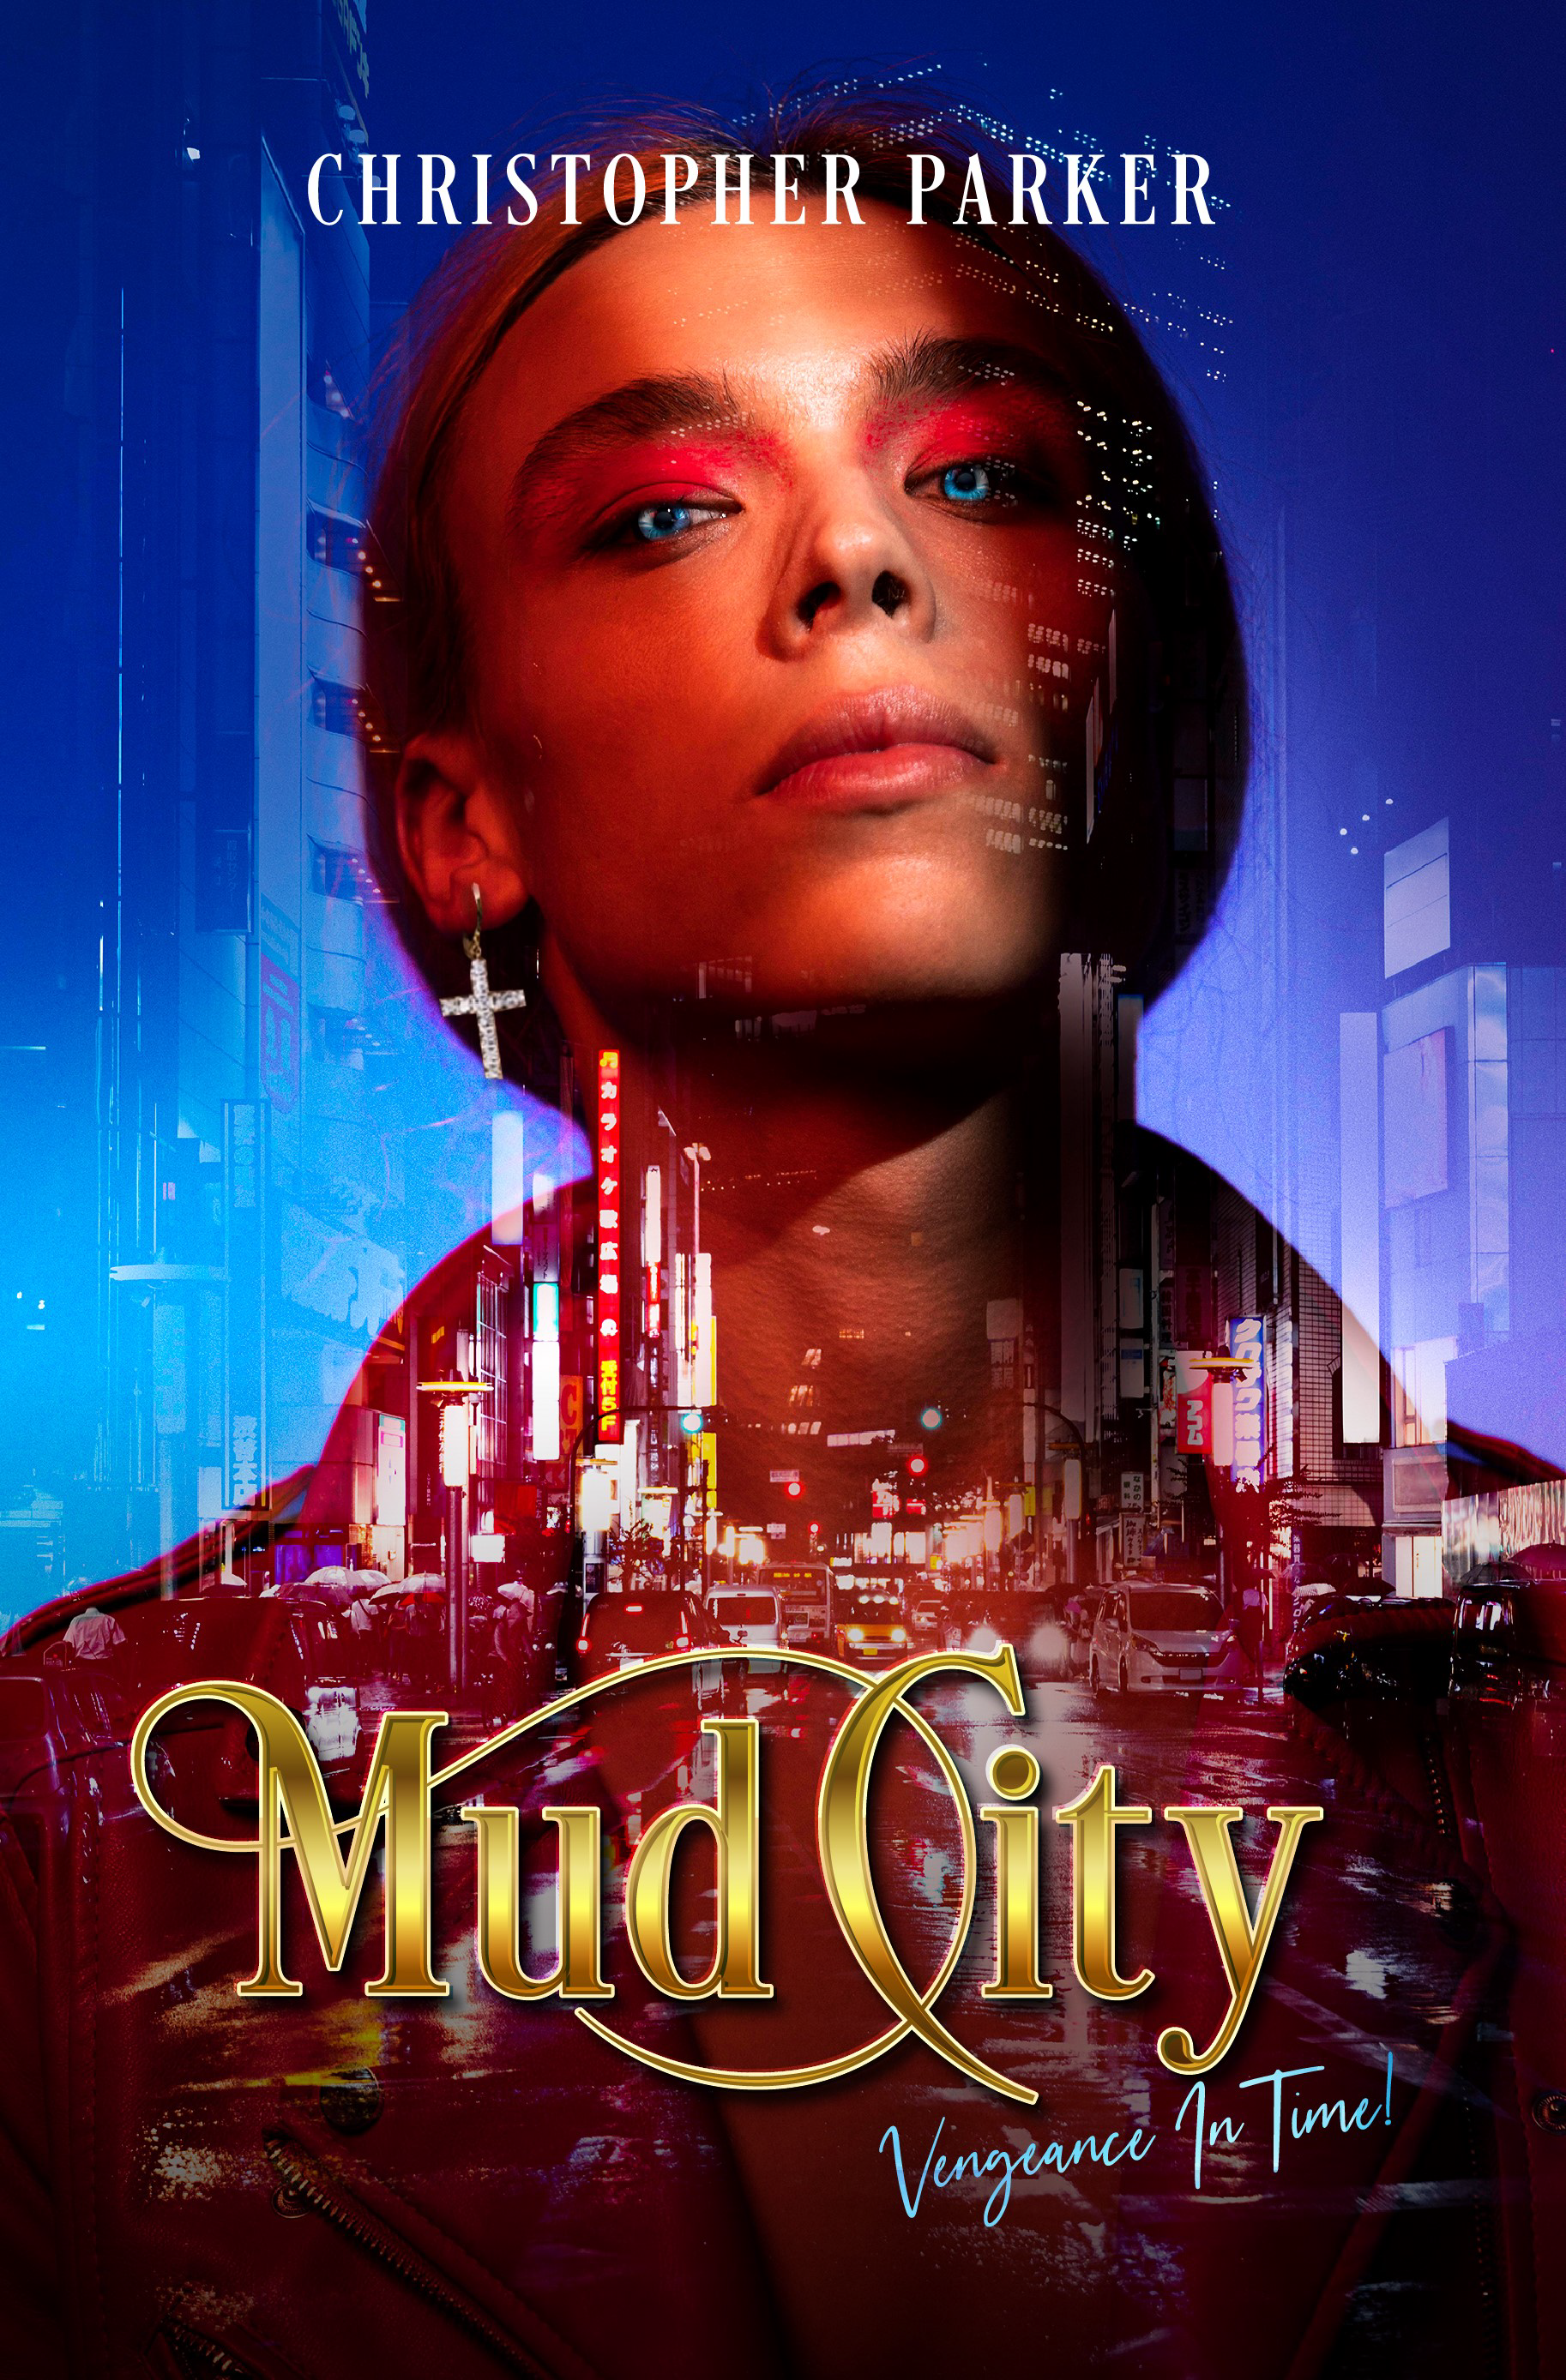 Time Travel and Its Role in the Plot of "Mud City"